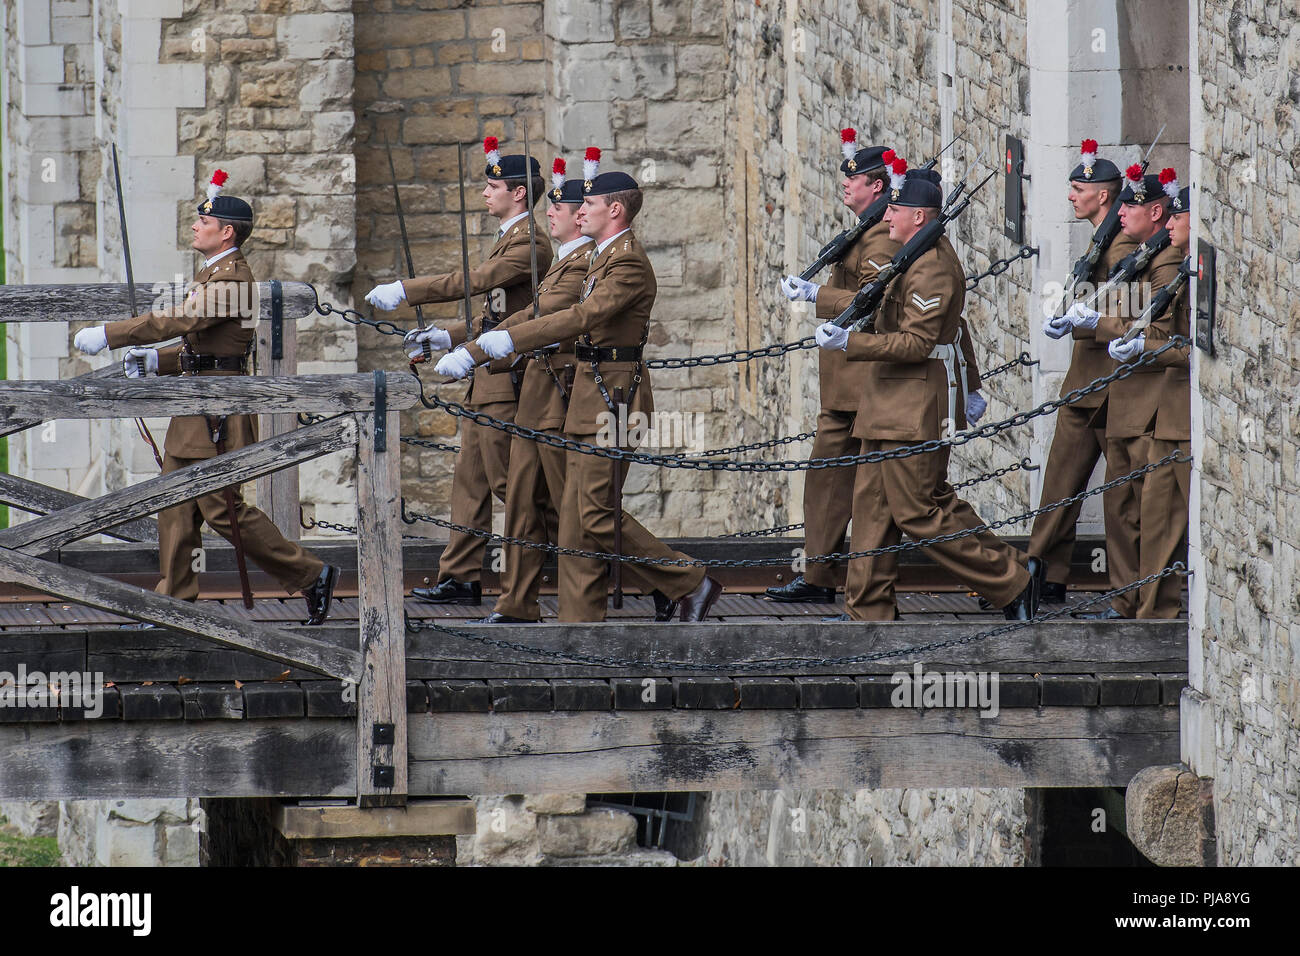 London, UK. 5th September 2018. Marching out of the East Gate of the Tower of London - The Royal Regiment of Fusiliers exercise their right to march through the Square Mile as one of the City of London’s Privileged Regiments to celebrate their 50th anniversary. This includes the right to march through the City of London with drums beating, colours flying and bayonets fixed in a parade from the Tower of London to the Guildhall. Credit: Guy Bell/Alamy Live News Stock Photo